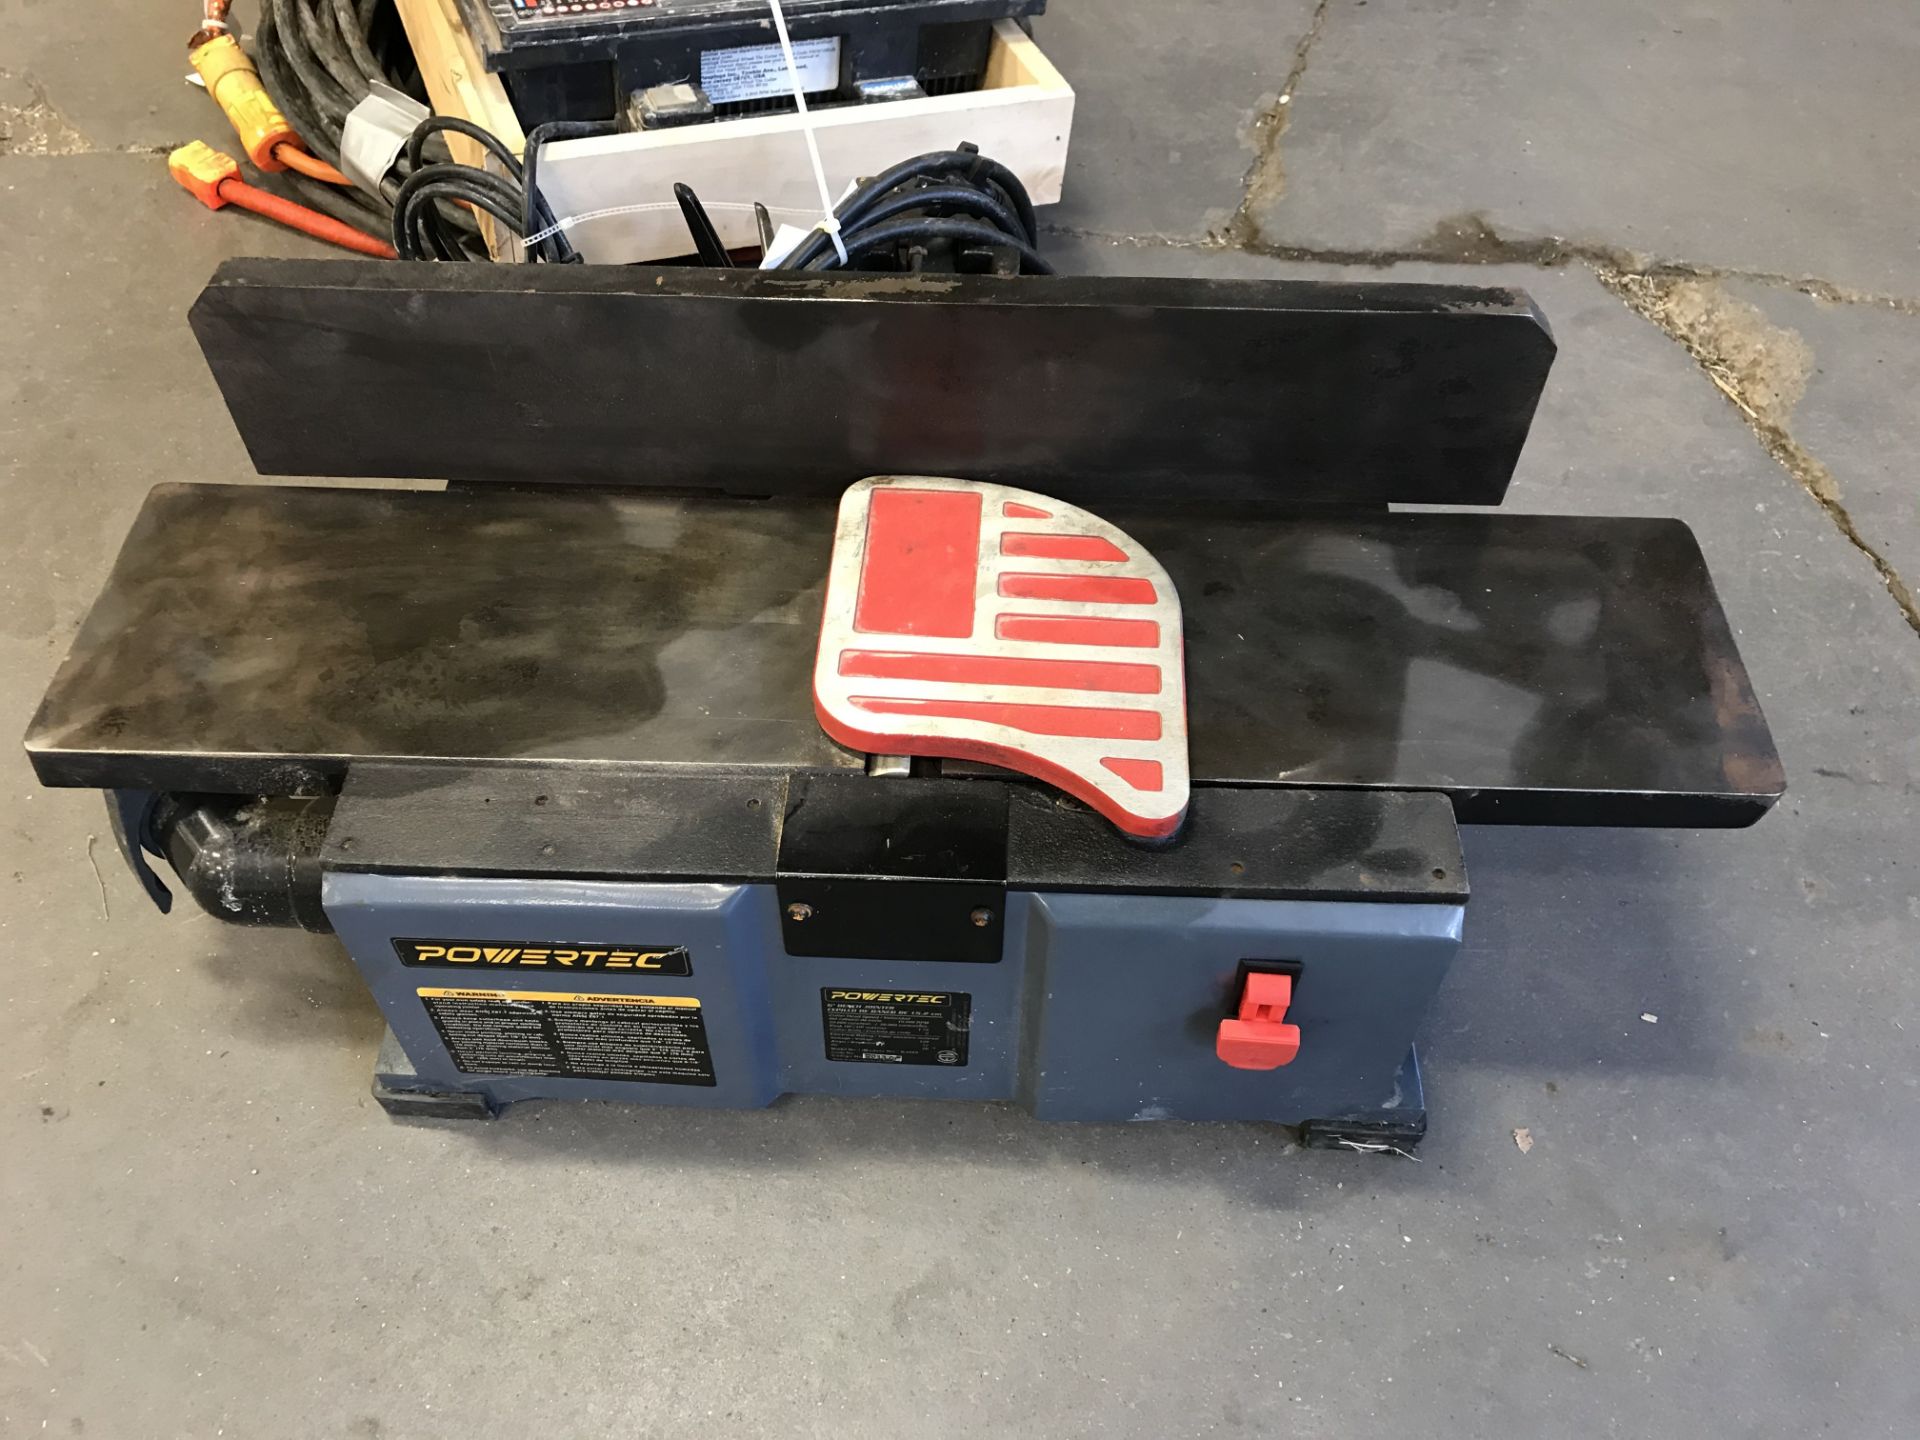 POWER TECK 6" PLANER - Image 6 of 7